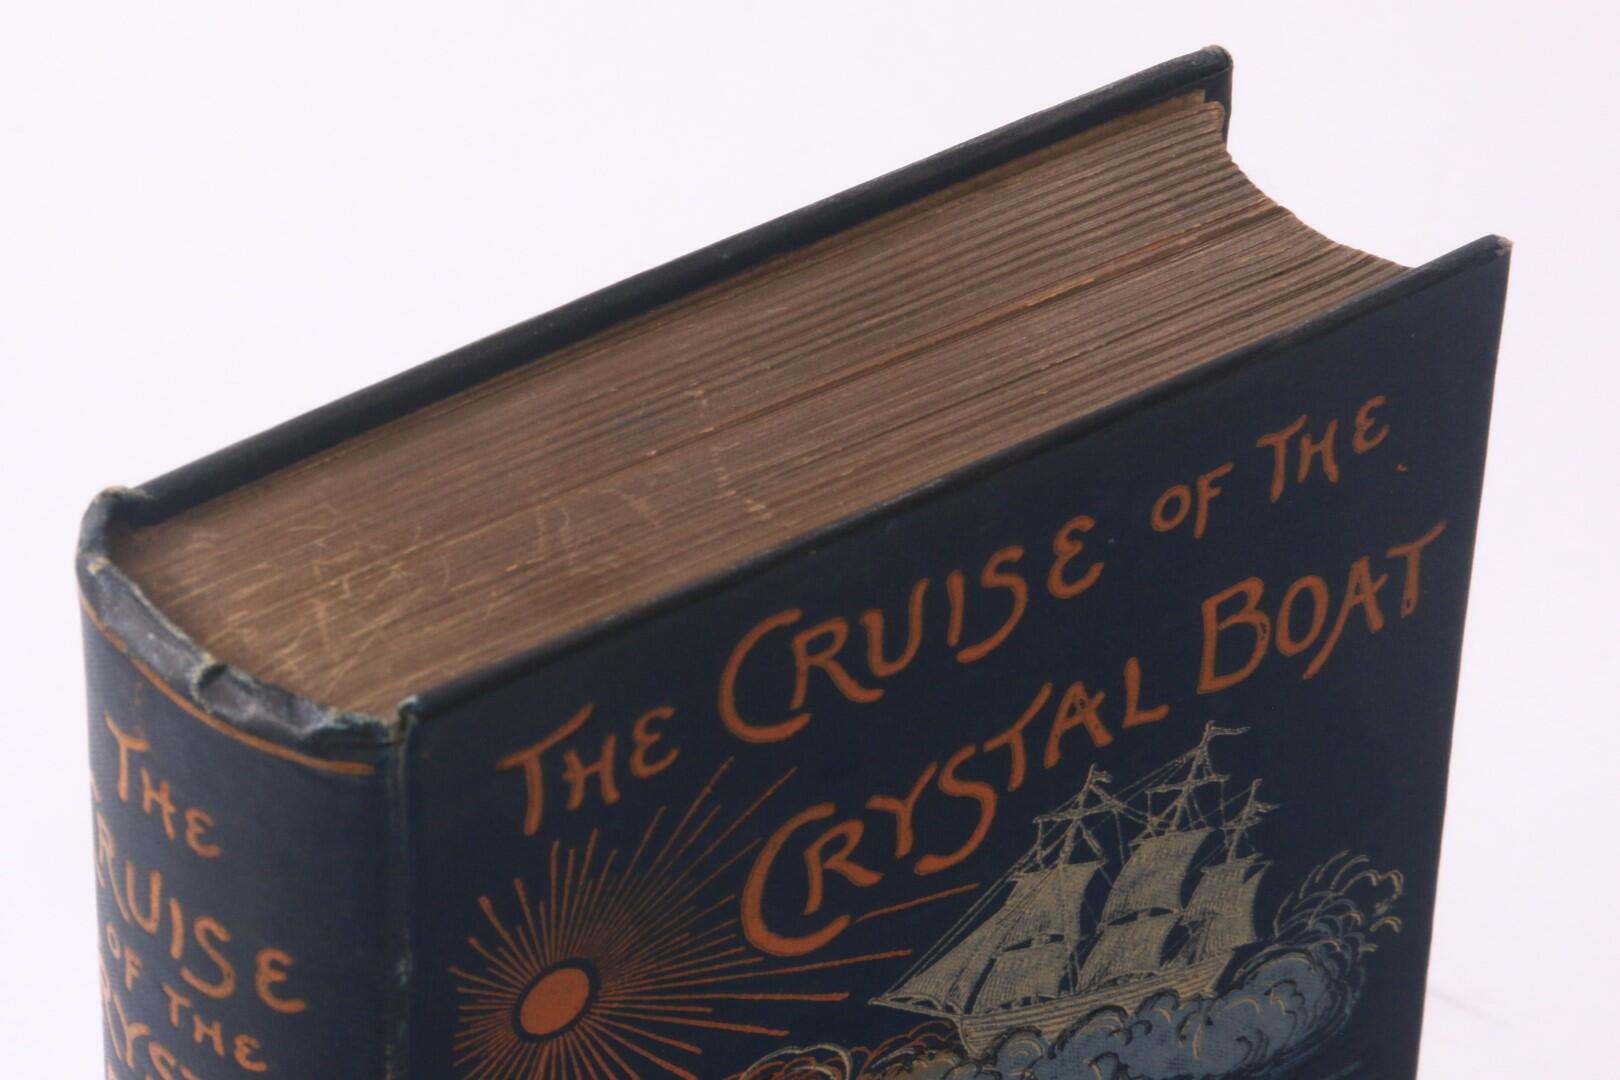 Gordon Stables - The Cruise of the Crystal Boat - Hutchinson, 1891, First Edition.